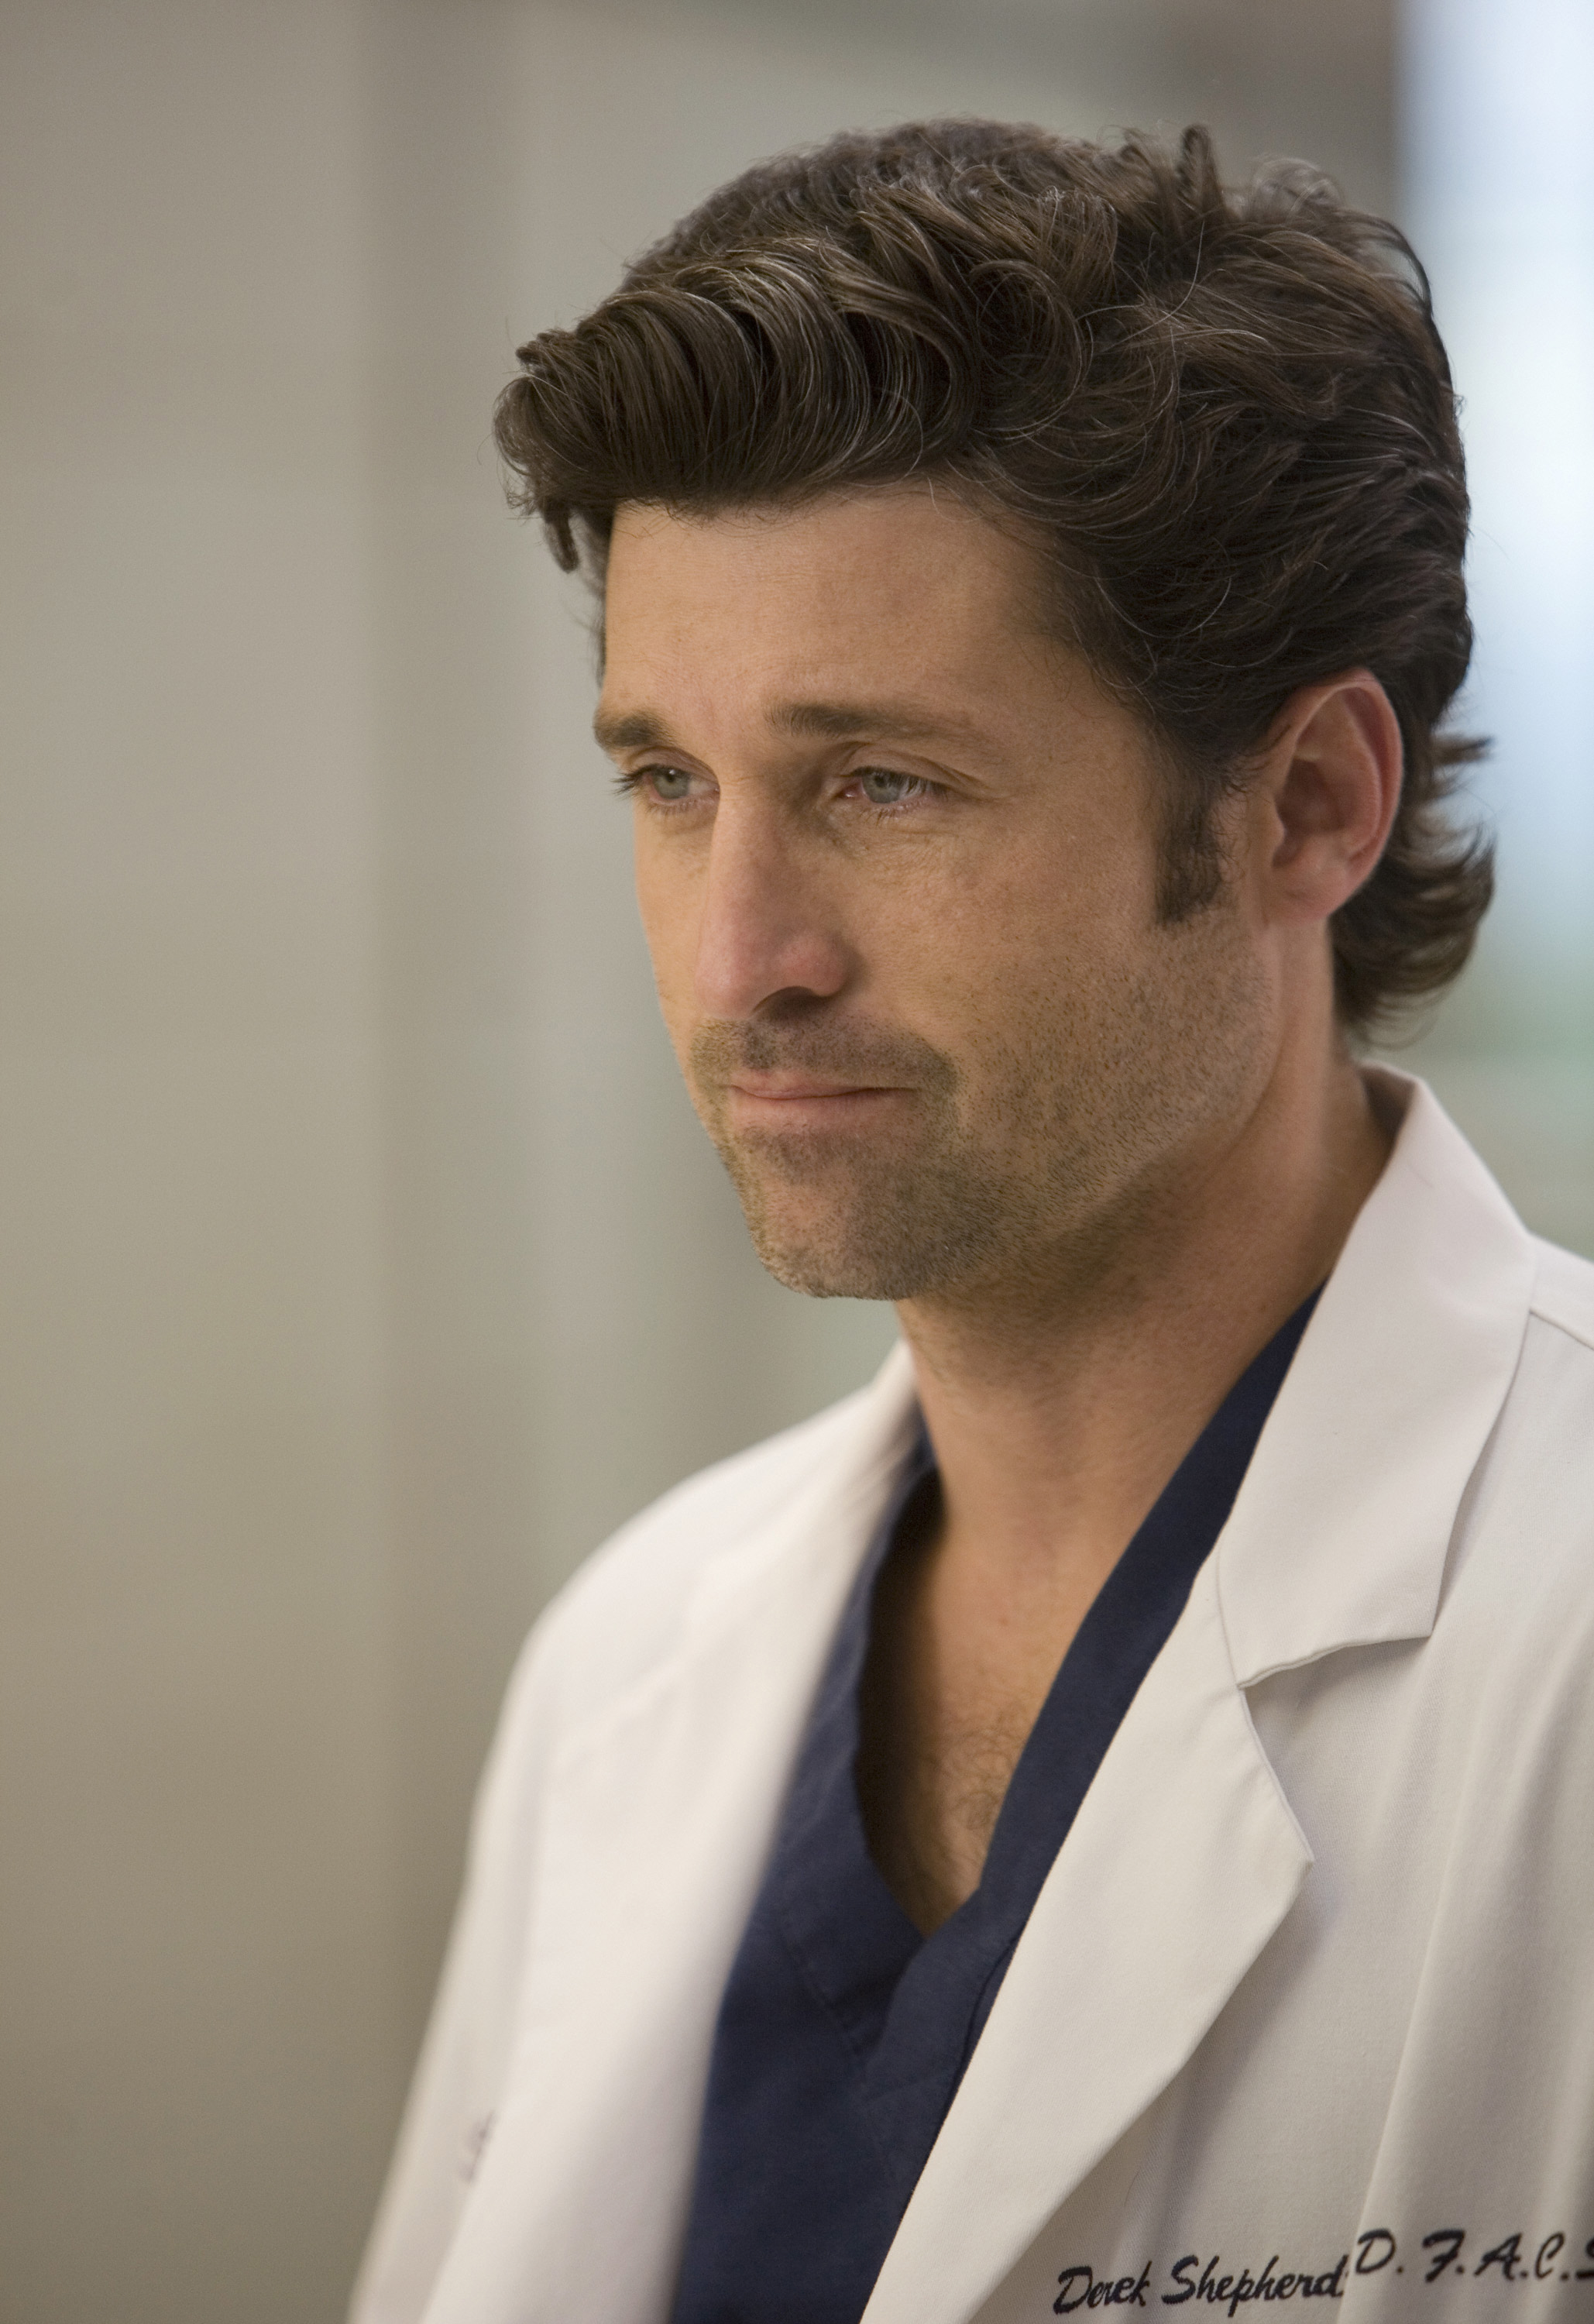 Patrick Dempsey on an episode of "Grey's Anatomy" in 2008 | Source: Getty Images